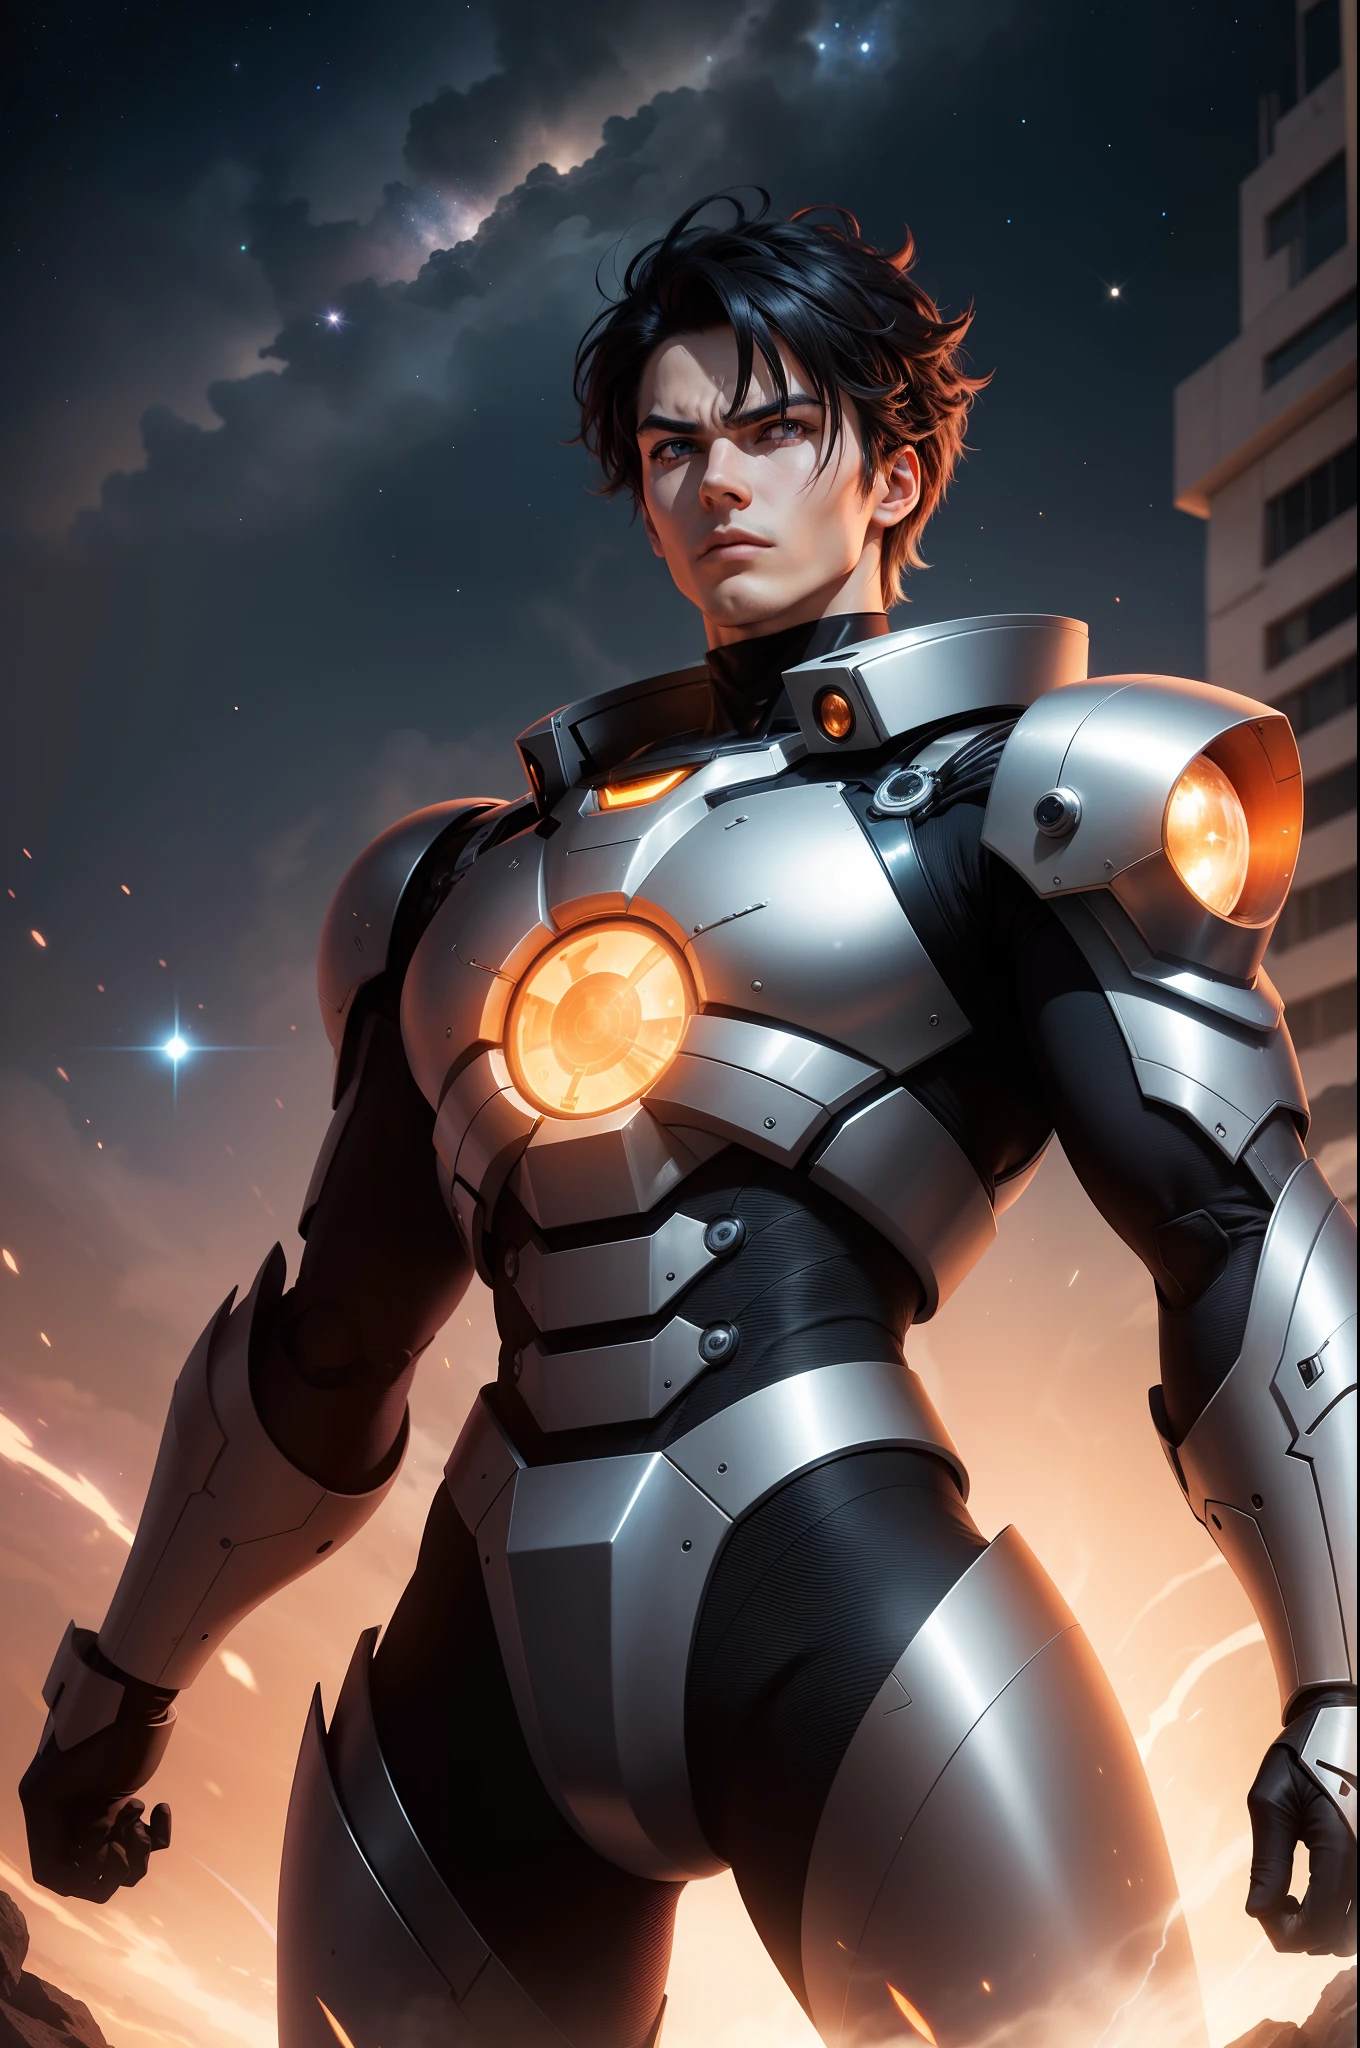 --Personagem: Jaspion
Jaspion is a fearless intergalactic hero known for his shining silver armor and his courageous attitude. His determined gaze reflects his dedication to protecting the galaxy from evil threats. His black hair and serious expression show his unwavering determination to fight for good.

--Daileon Robot
In the background, the imposing Daileon Robot rises as a giant guardian. Its metallic structure is marked by aerodynamic lines and complex technological details. Os olhos luminosos do Daileon emitem um brilho intenso, indicating his strength and power. His steady hands hold advanced weapons, ready to defend justice alongside Jaspion.

--Space Scenario
The scene unfolds in the midst of vast outer space, com estrelas cintilantes e nebulosas coloridas pontilhando o fundo escuro. Jaspion and Daileon are positioned on a metal platform, Prepared to embark on an epic new mission to confront the evil that threatens galactic peace.

--Adventure Atmosphere
The image captures the essence of the intergalactic adventure, conveying a sense of heroism and determination. The combination of the heroic figure of Jaspion with the formidable Robot Daileon creates an impactful scene that evokes action, Emotion and the promise of epic battles in the cosmos.